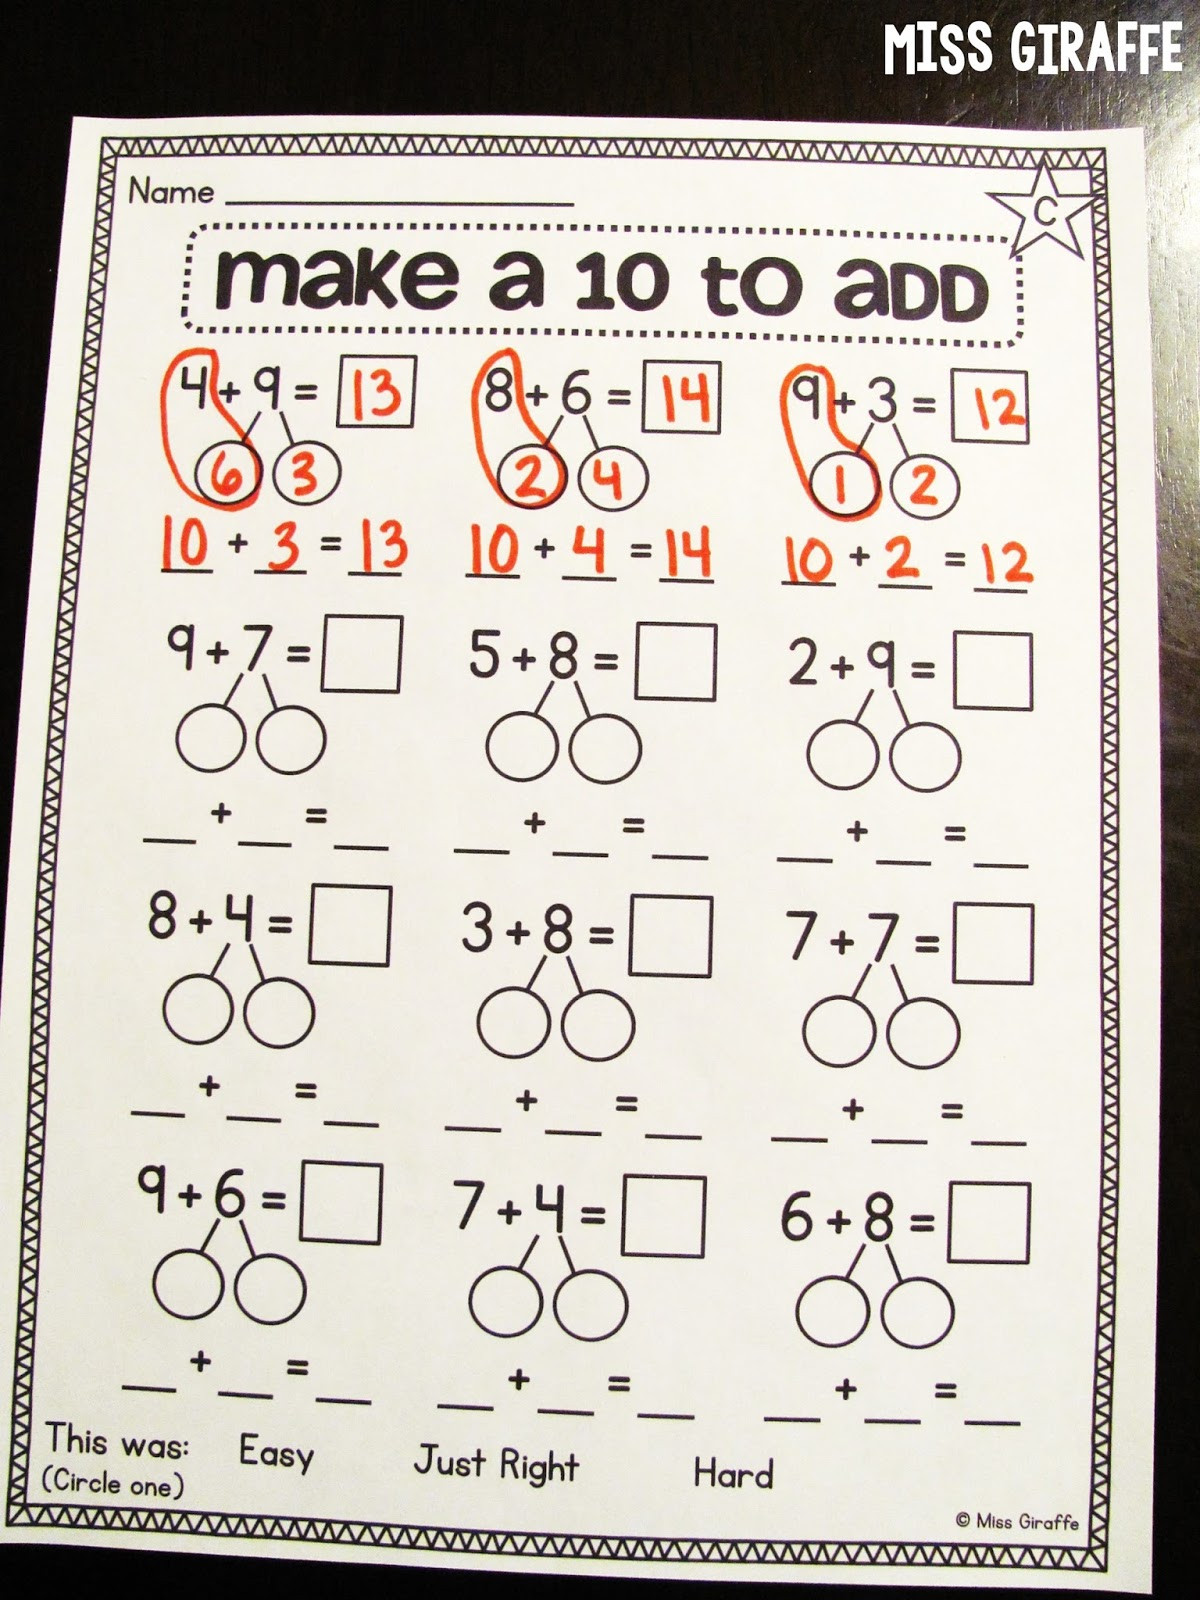 Composing and Decomposing Numbers Worksheet Miss Giraffe S Class Making A 10 to Add